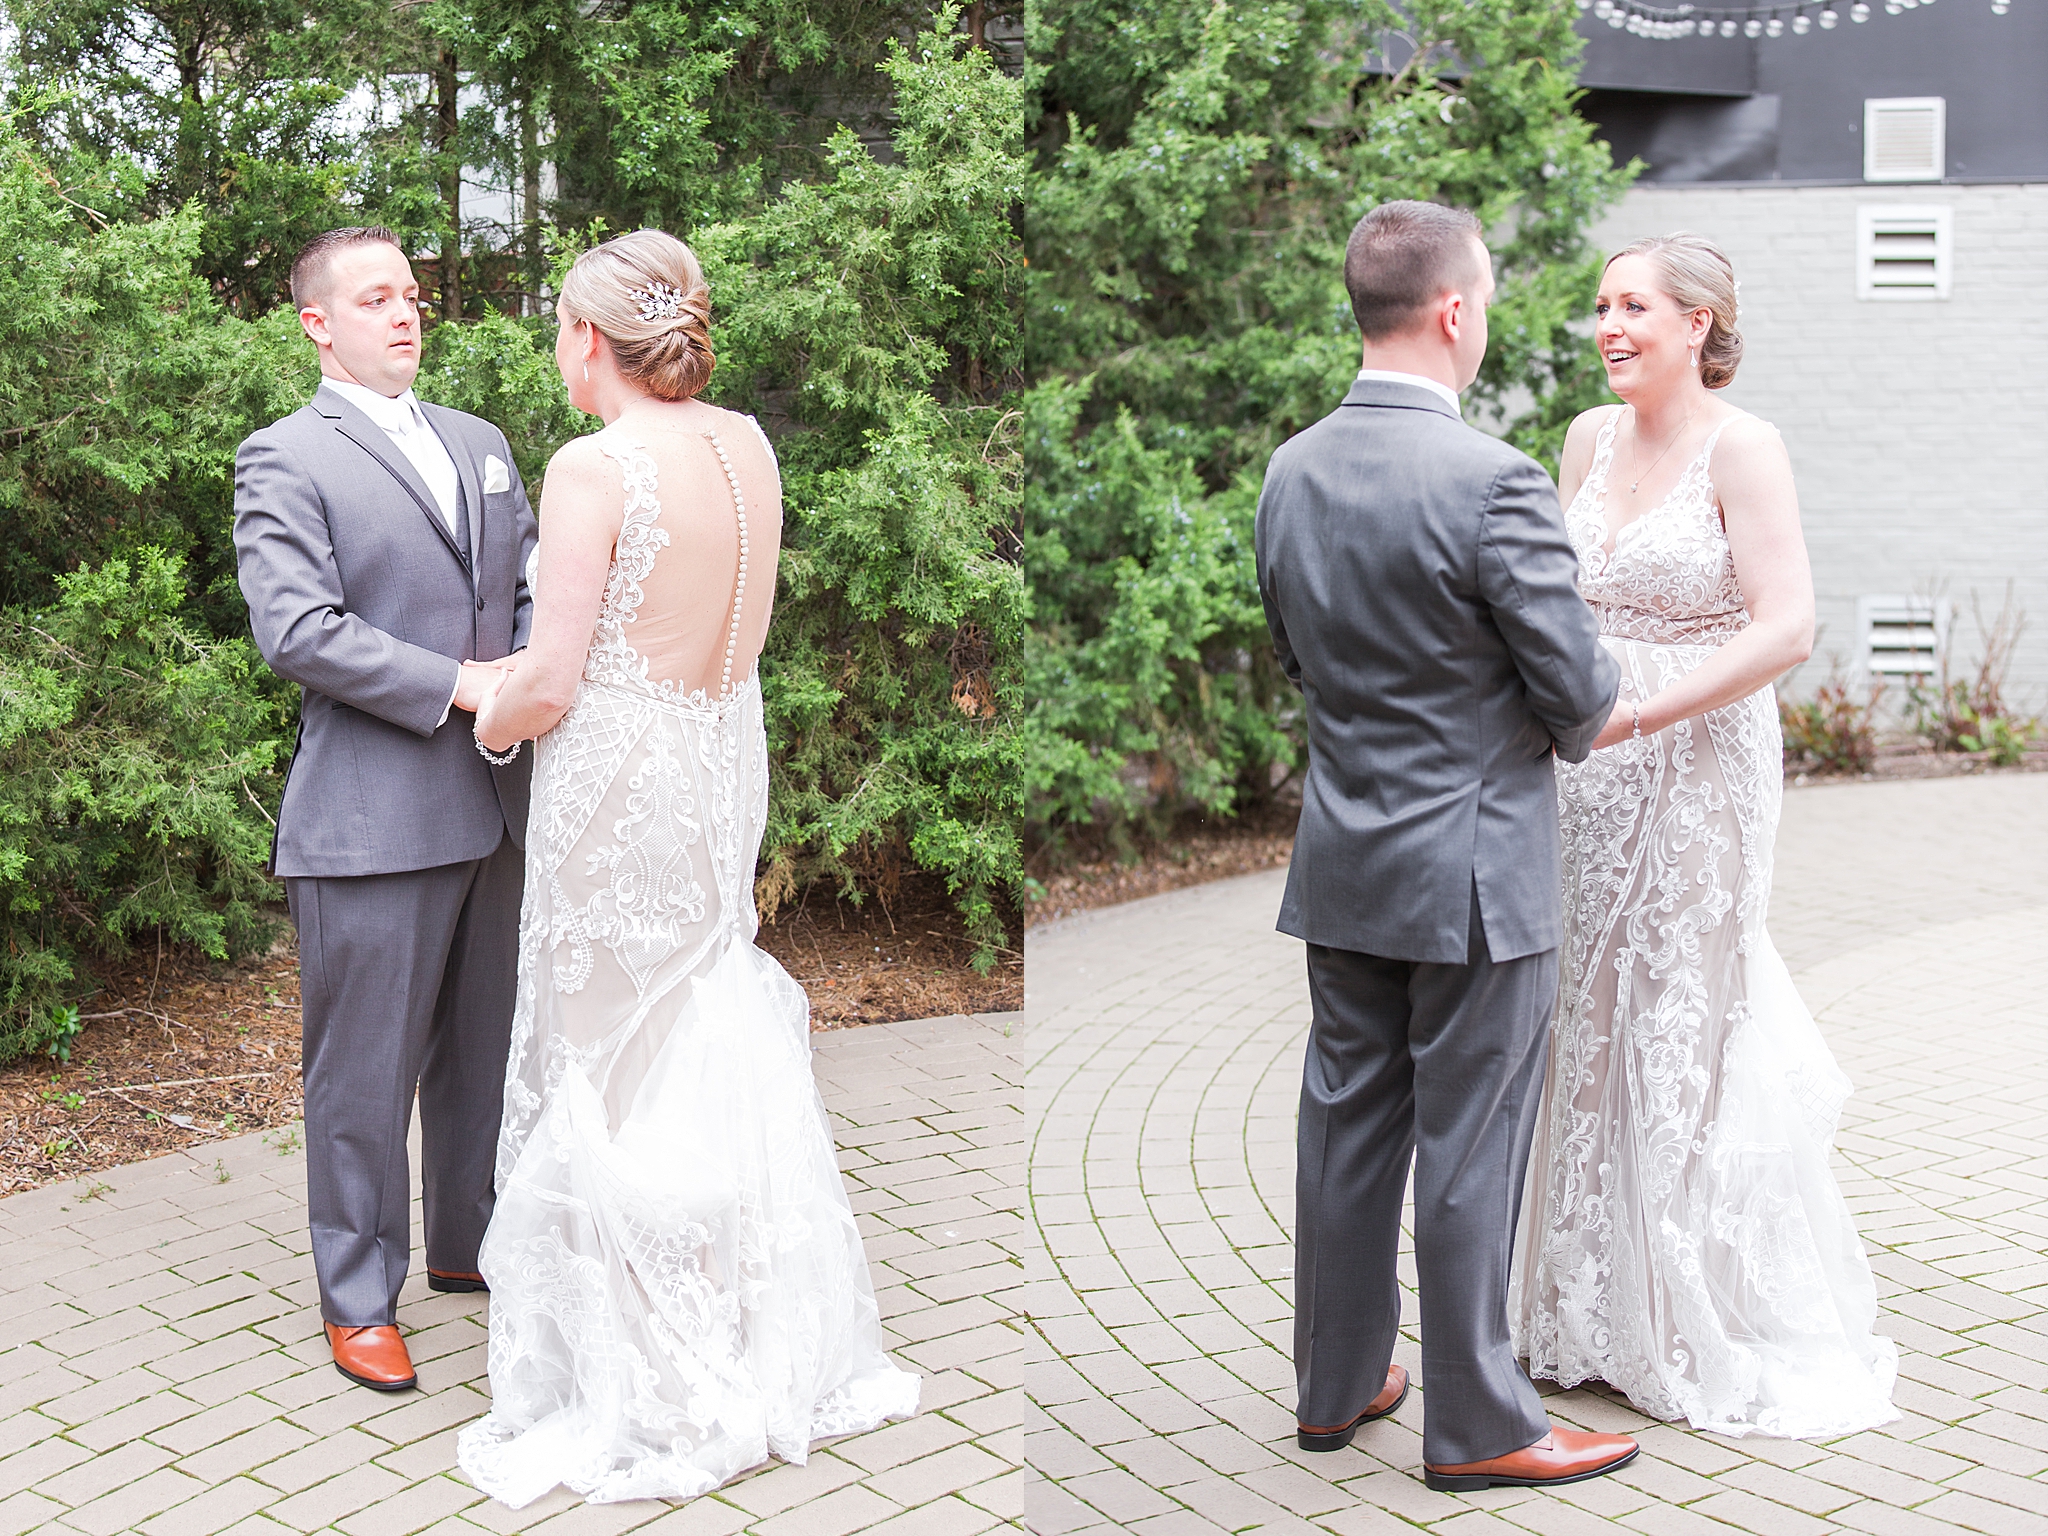 modern-romantic-wedding-photography-at-webers-in-ann-arbor-michigan-by-courtney-carolyn-photography_0022.jpg